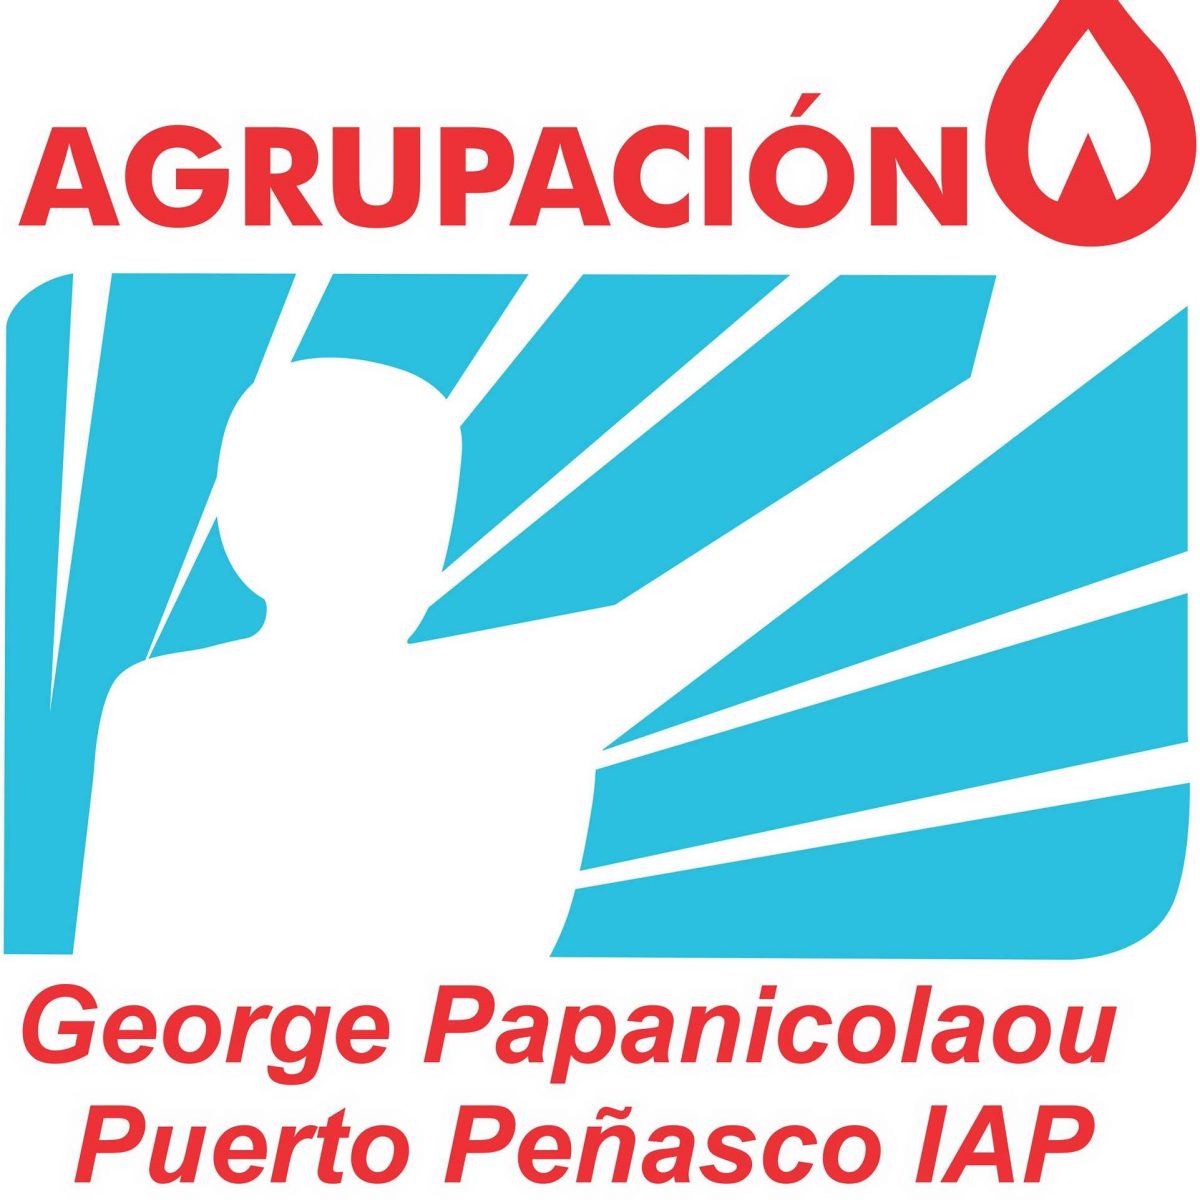 2020-george-pap-penasco-logo-1200x1200 Breast Cancer Awareness campaign aims to provide at least 100 free mammograms